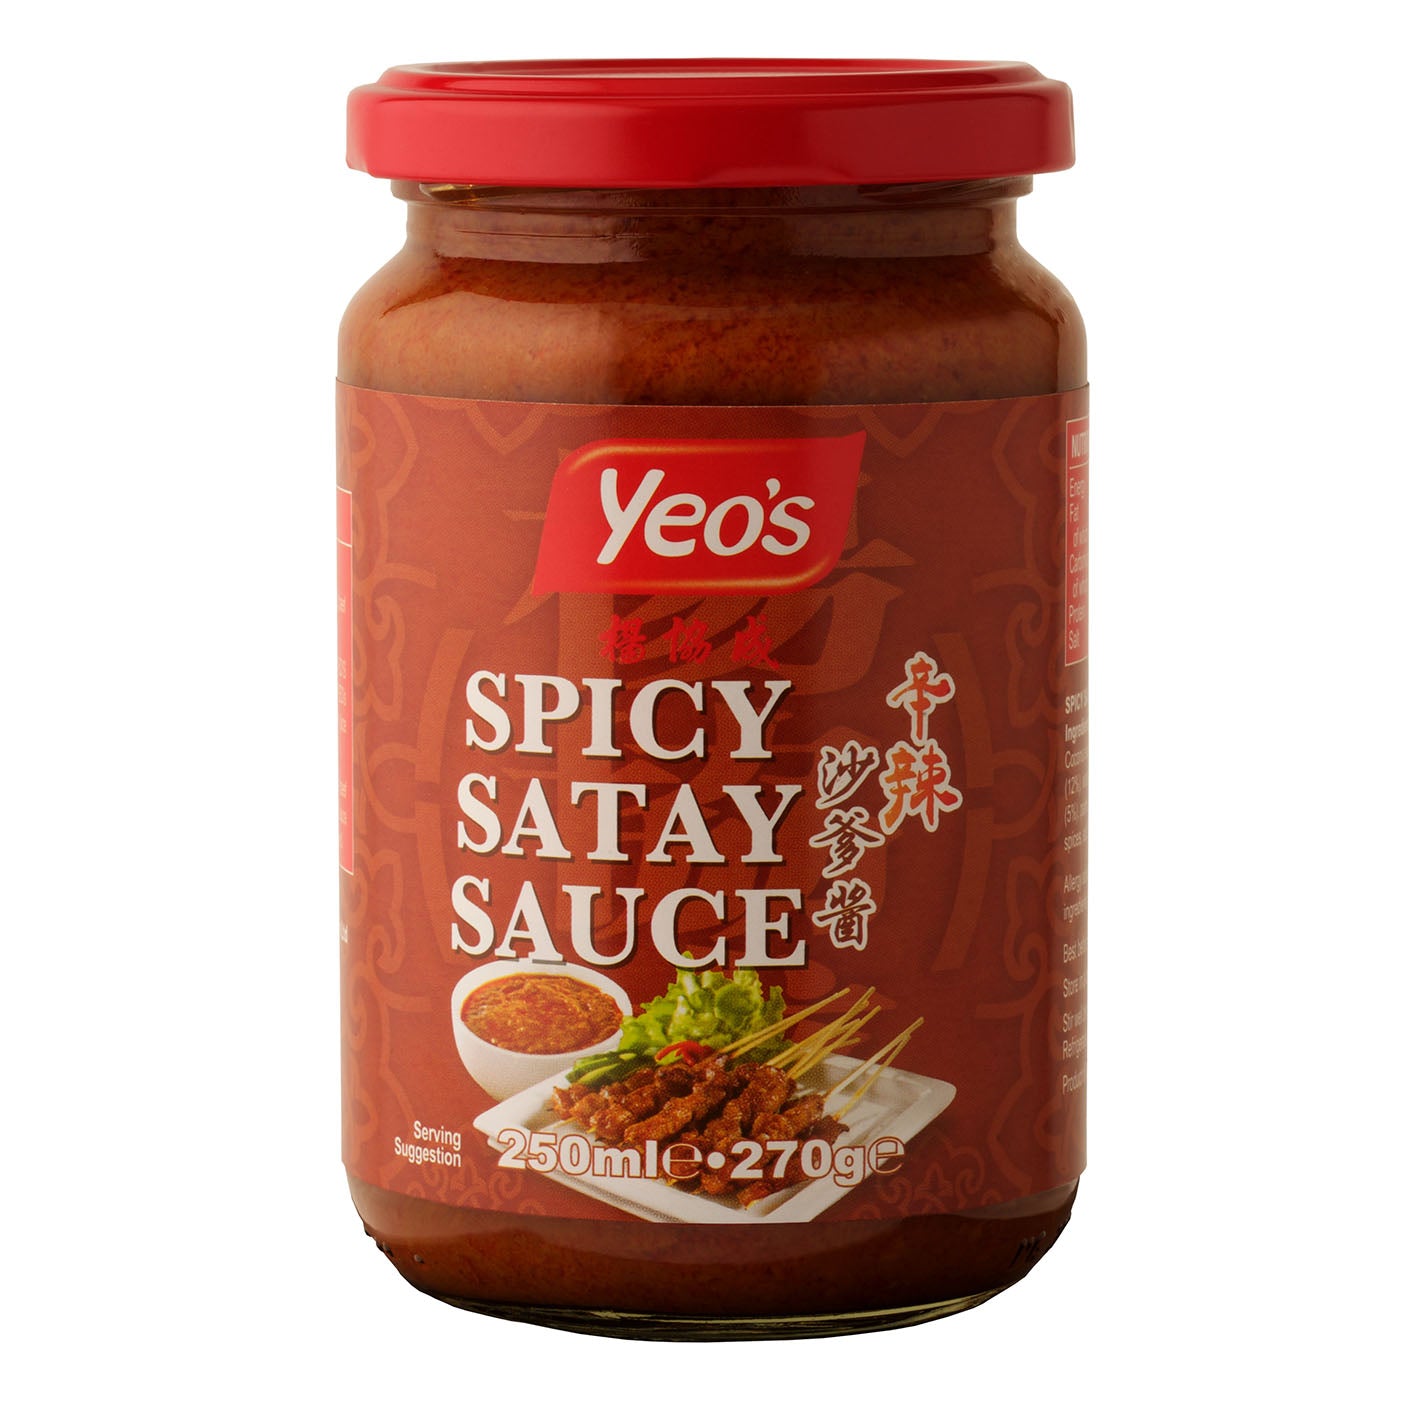 Asian Spicy Satay Sauce 250ml by Yeo's